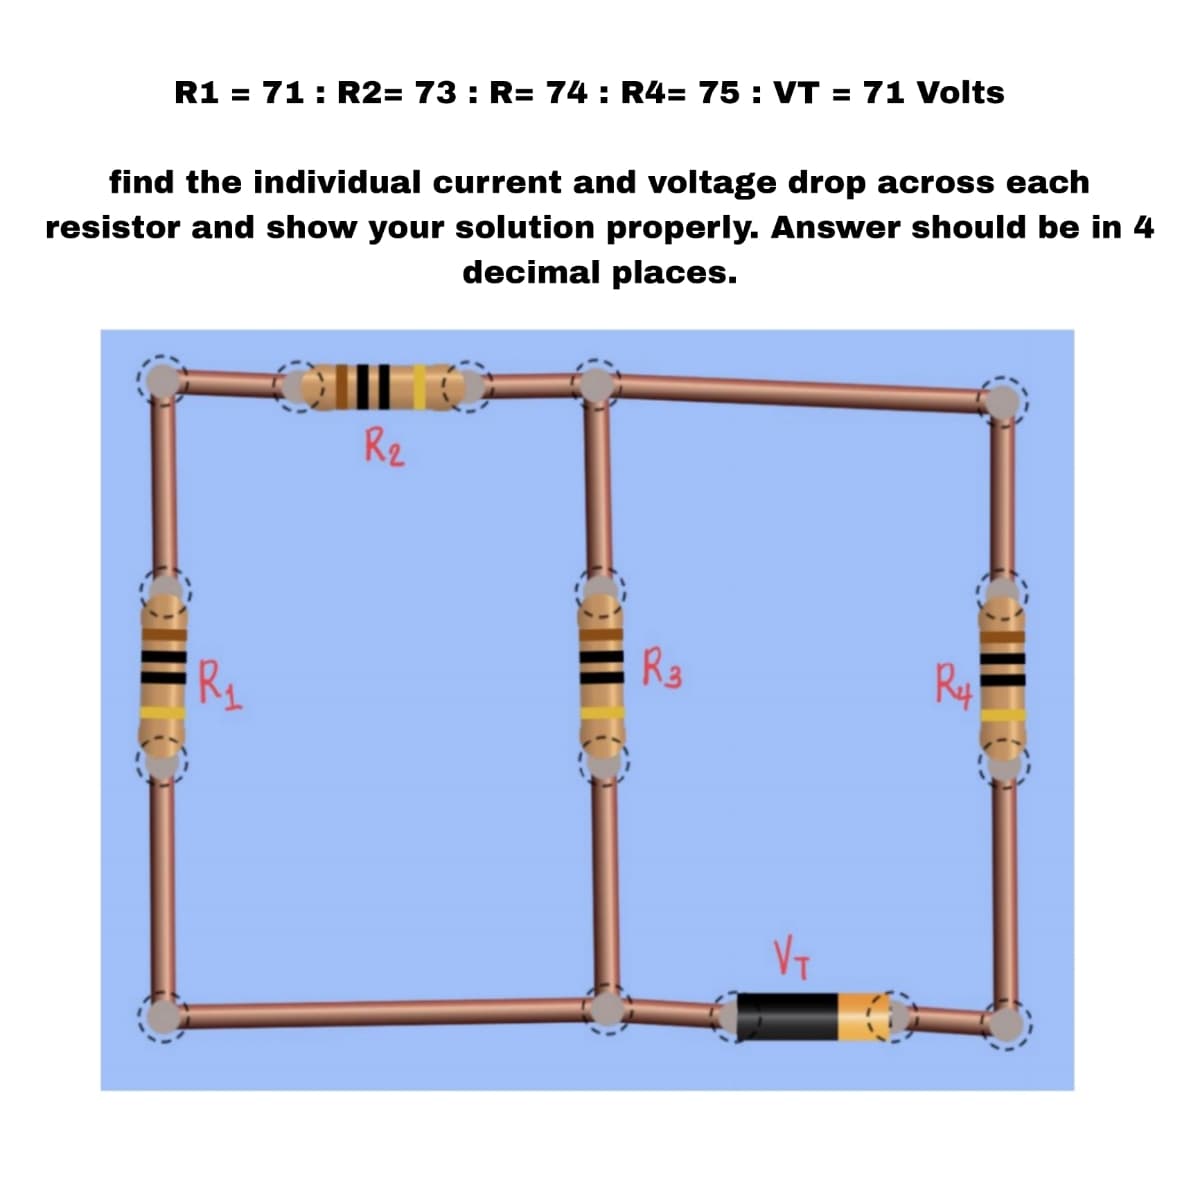 R1 = 71: R2= 73: R= 74: R4= 75: VT = 71 Volts
find the individual current and voltage drop across each
resistor and show your solution properly. Answer should be in 4
decimal places.
R₂
R3
R4